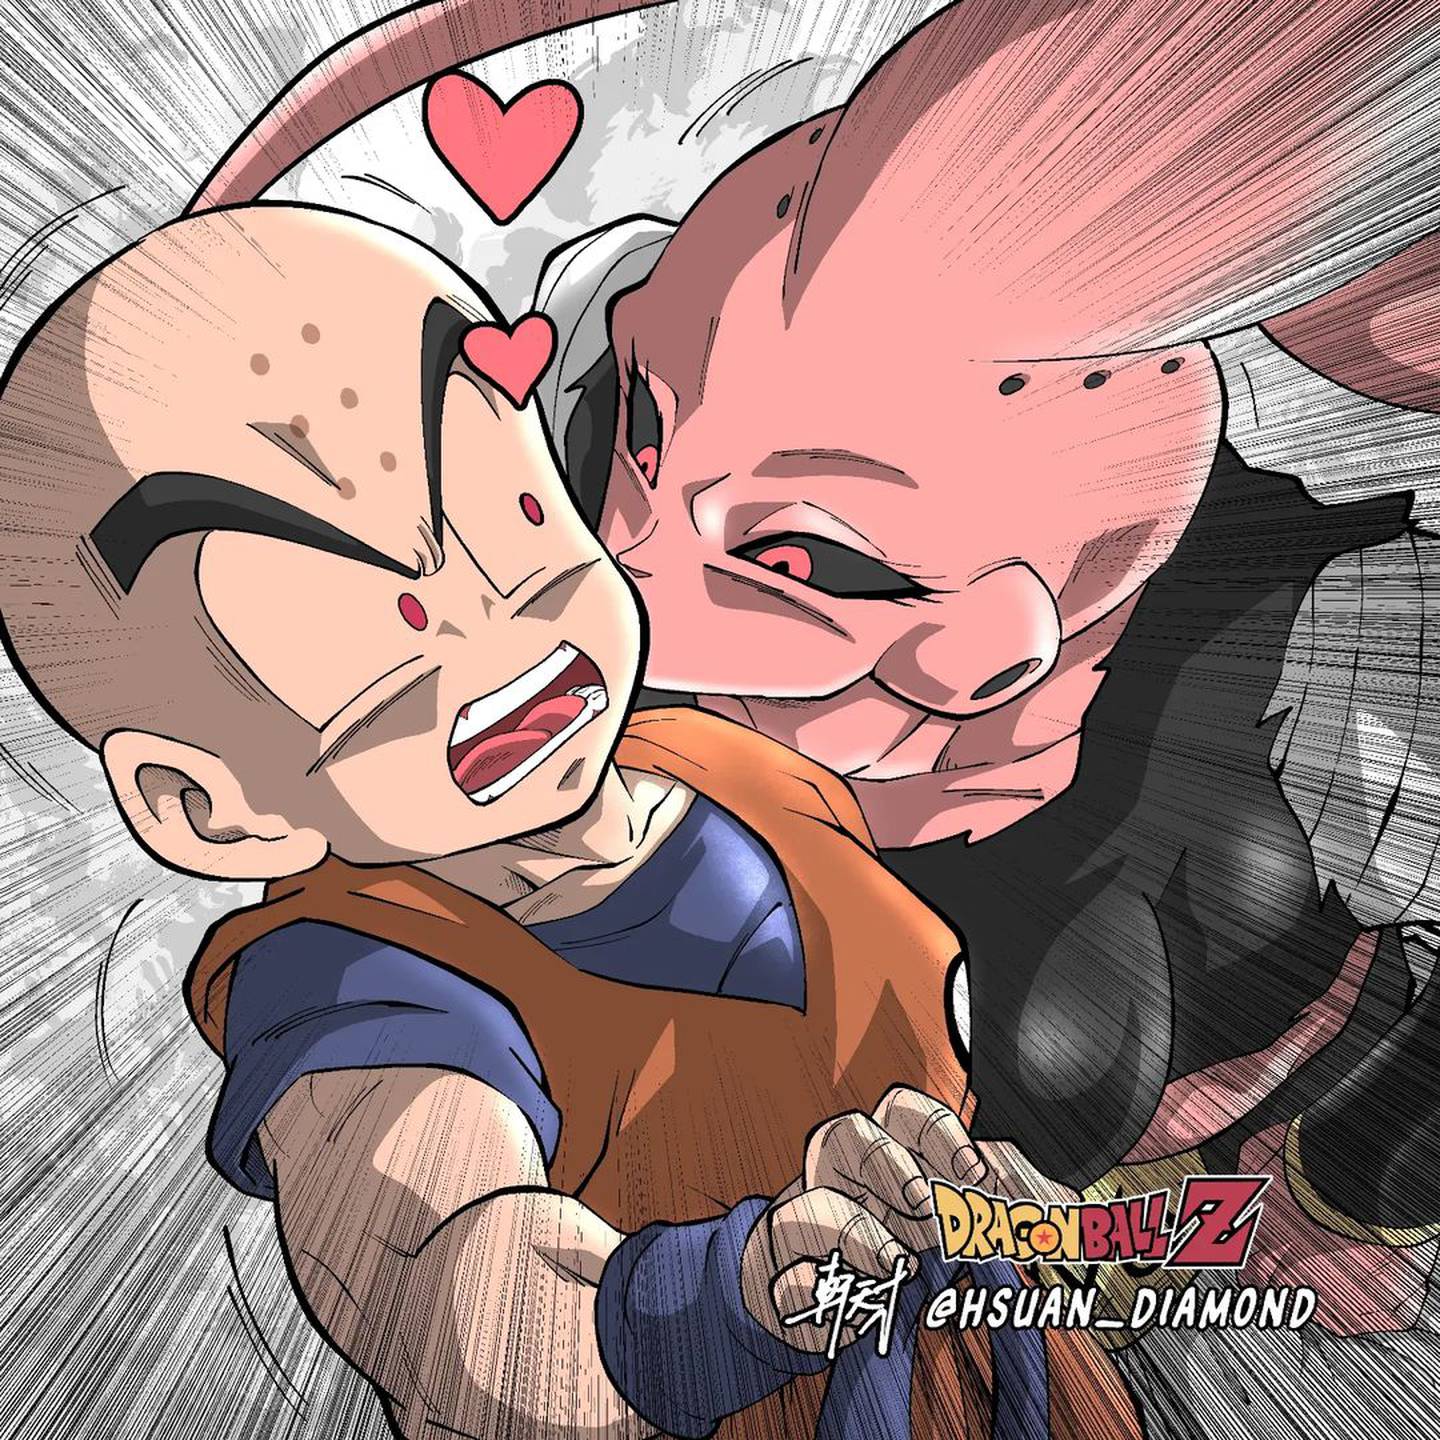 Kid Buu and Android 18